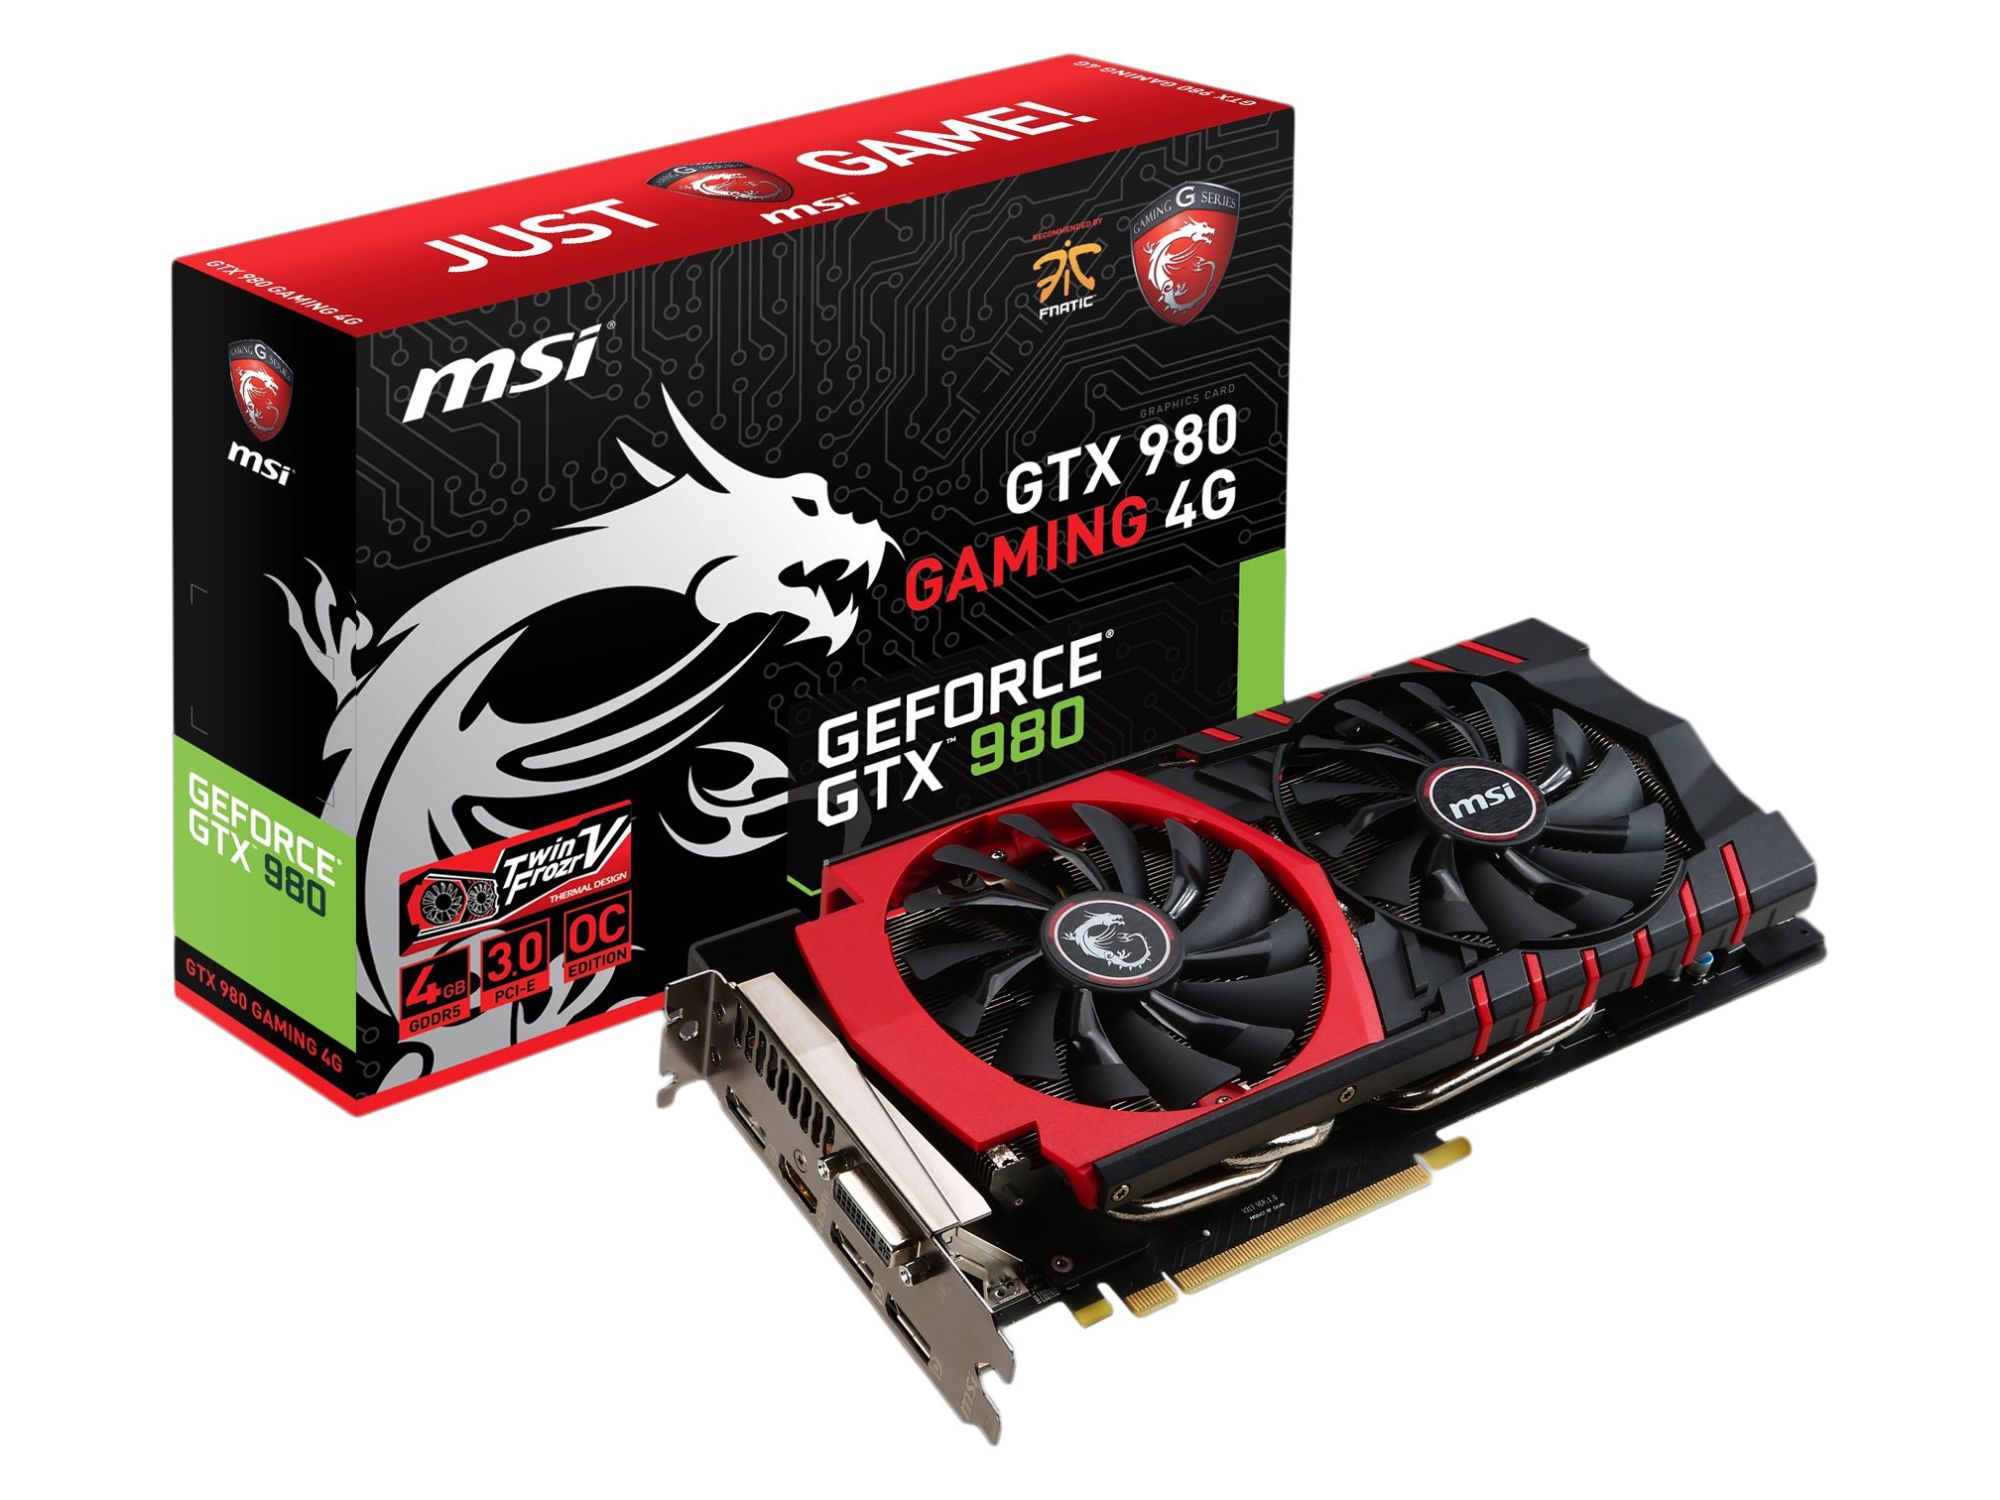 14 Best Msi Geforce Gtx 980 Gaming 4G for 2023